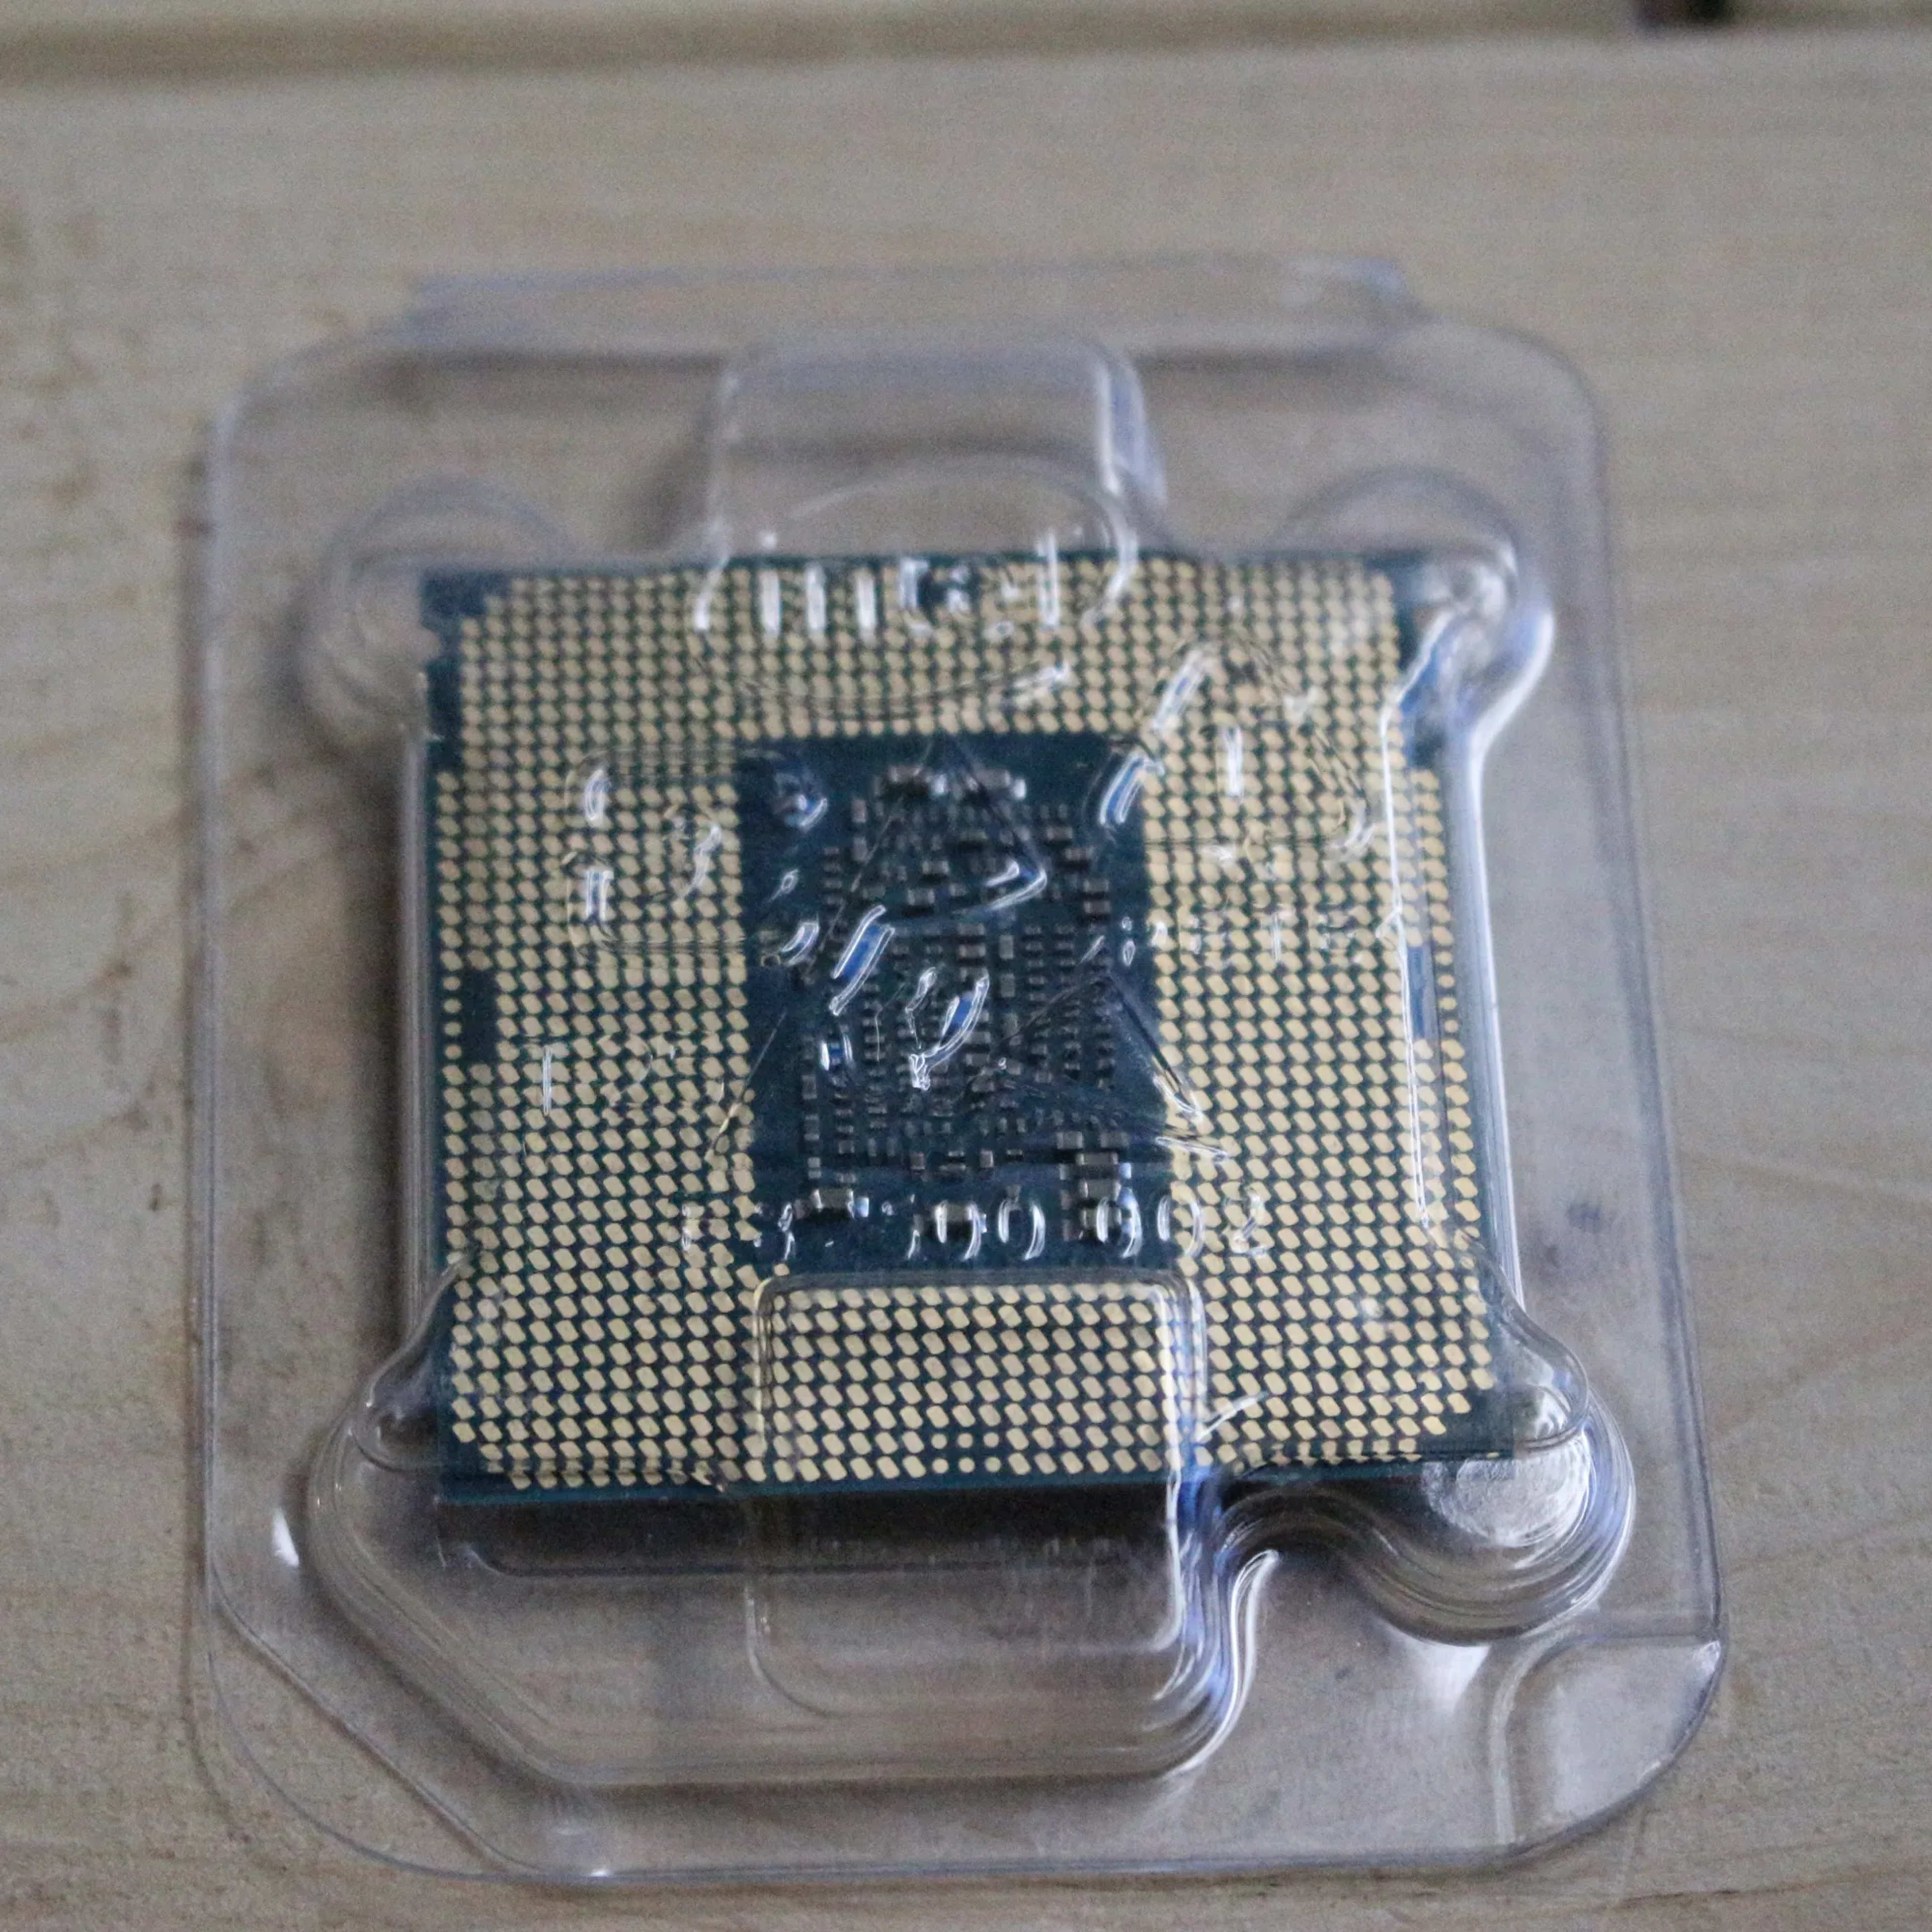 Intel Core i7-7700K | 4 Cores 8 Threads @4.20GHz